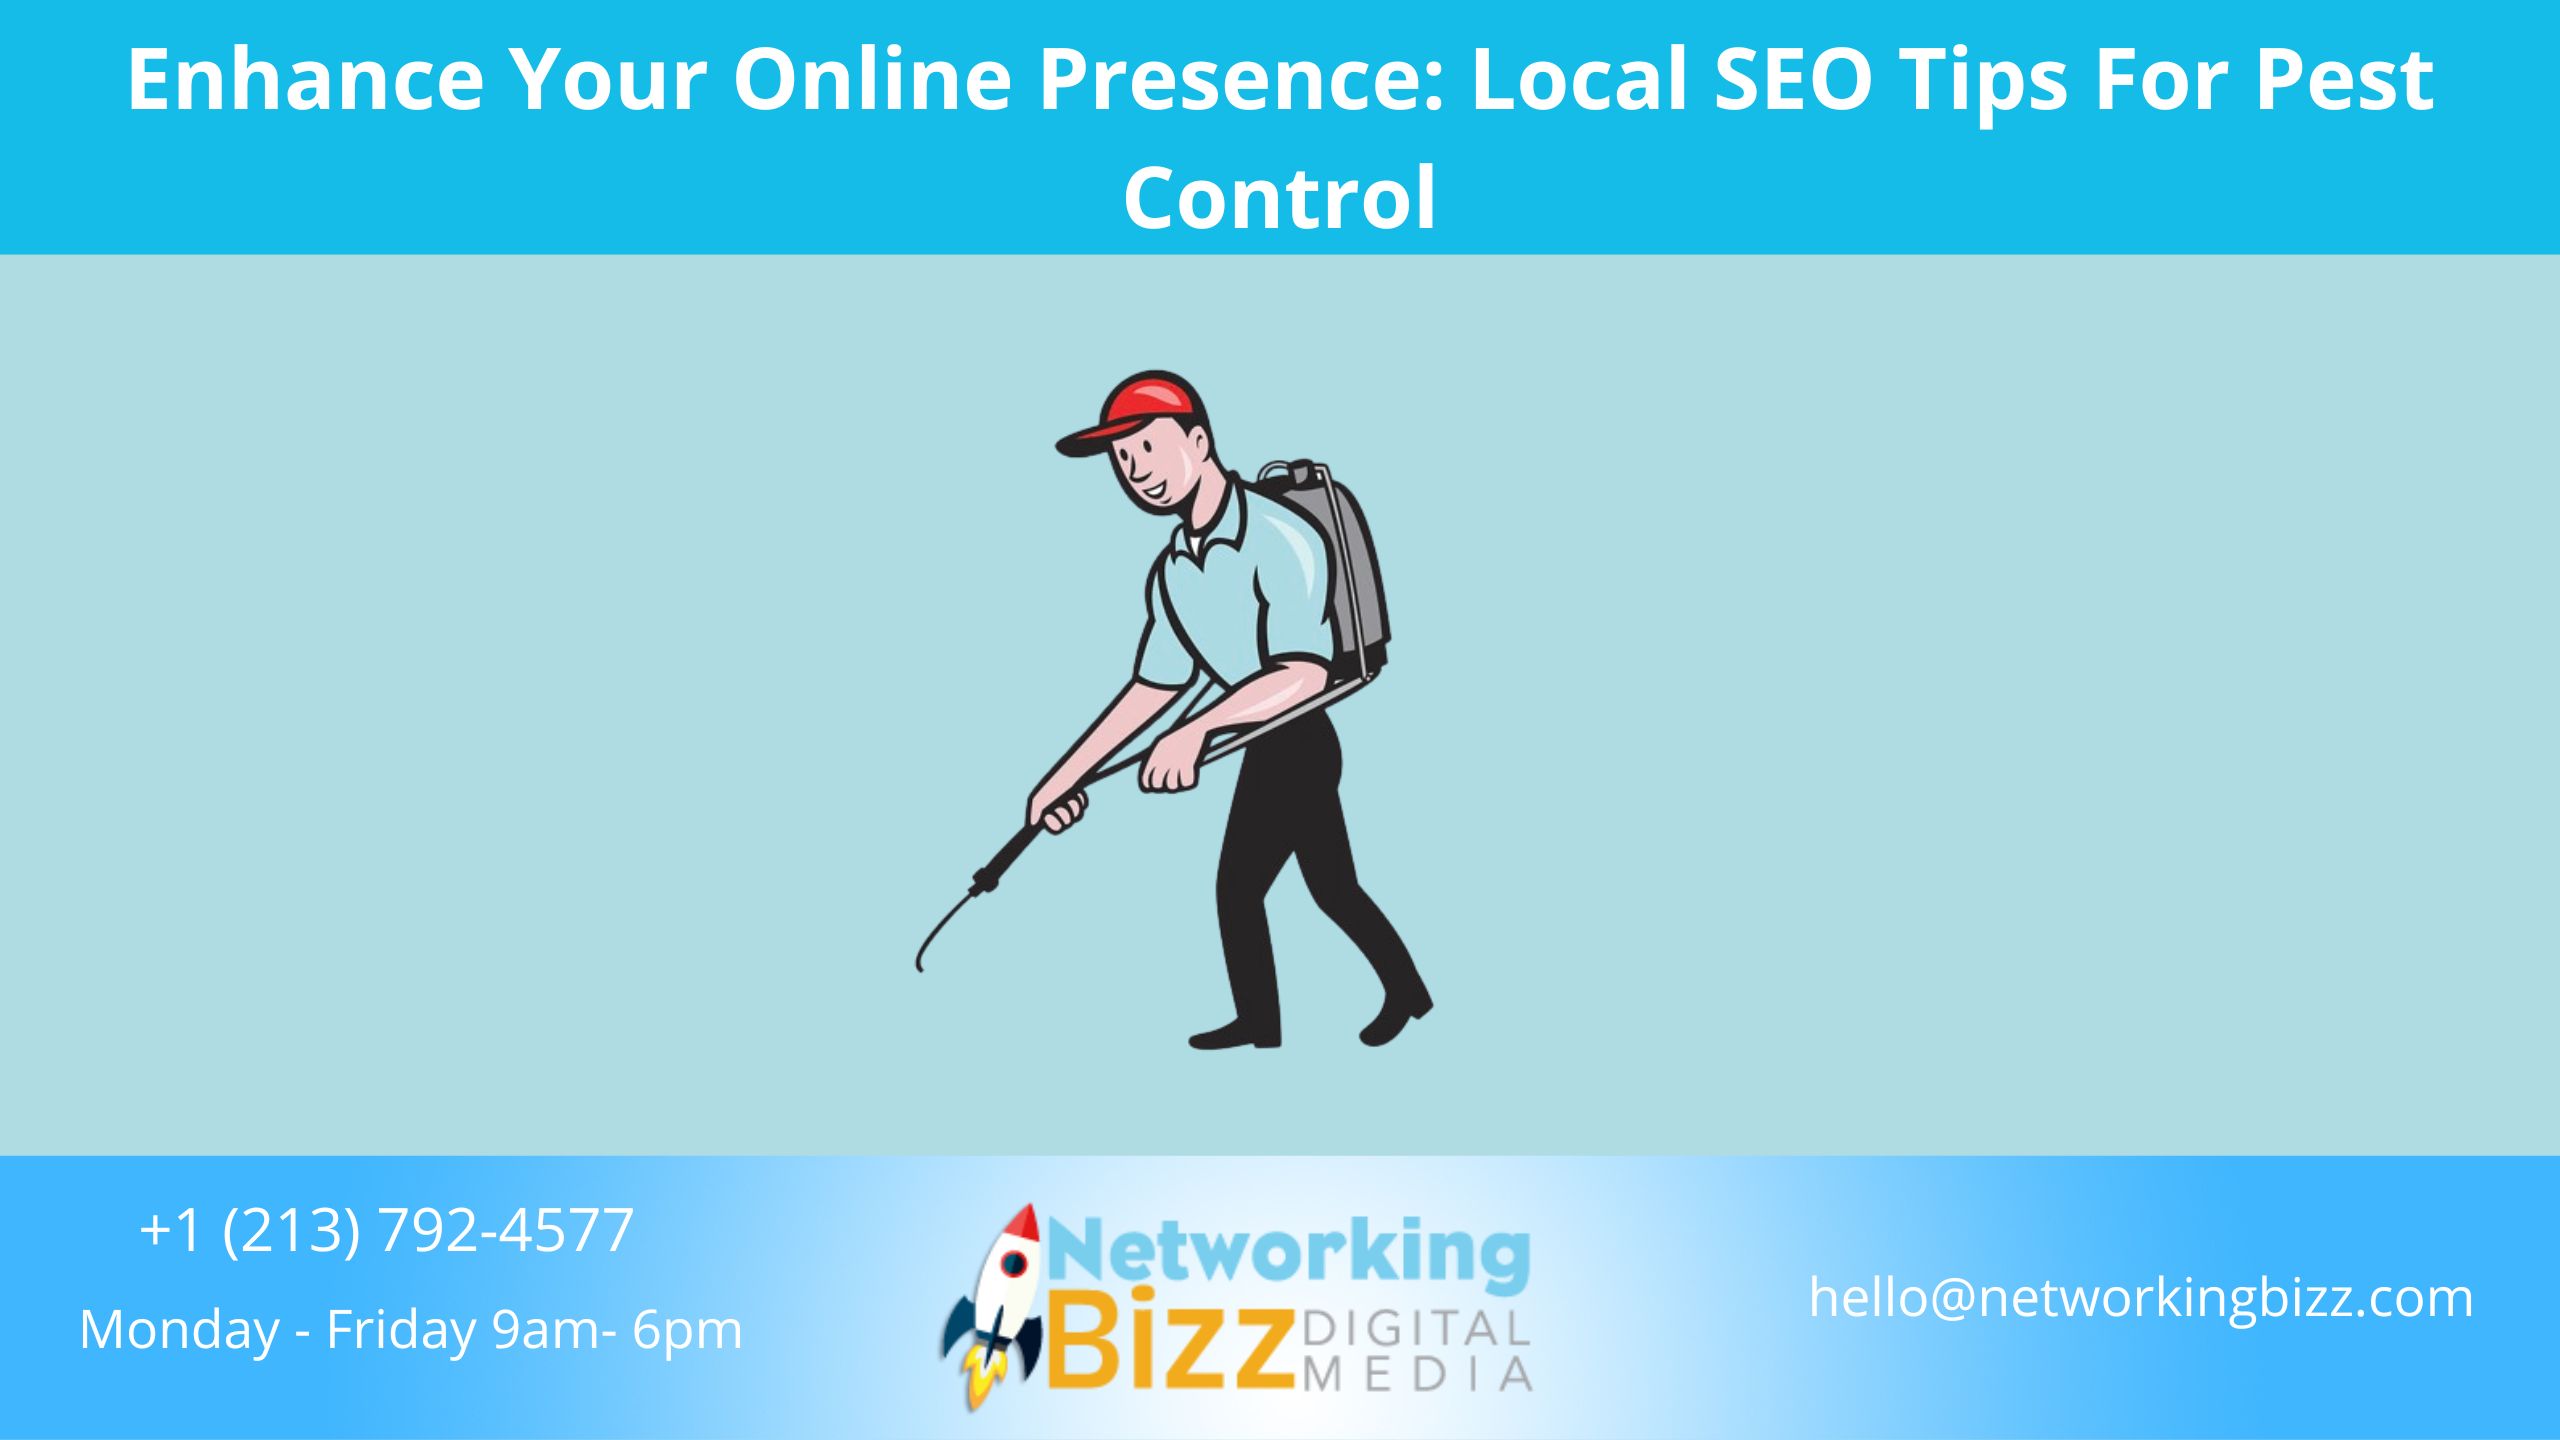 Enhance Your Online Presence: Local SEO Tips For Pest Control